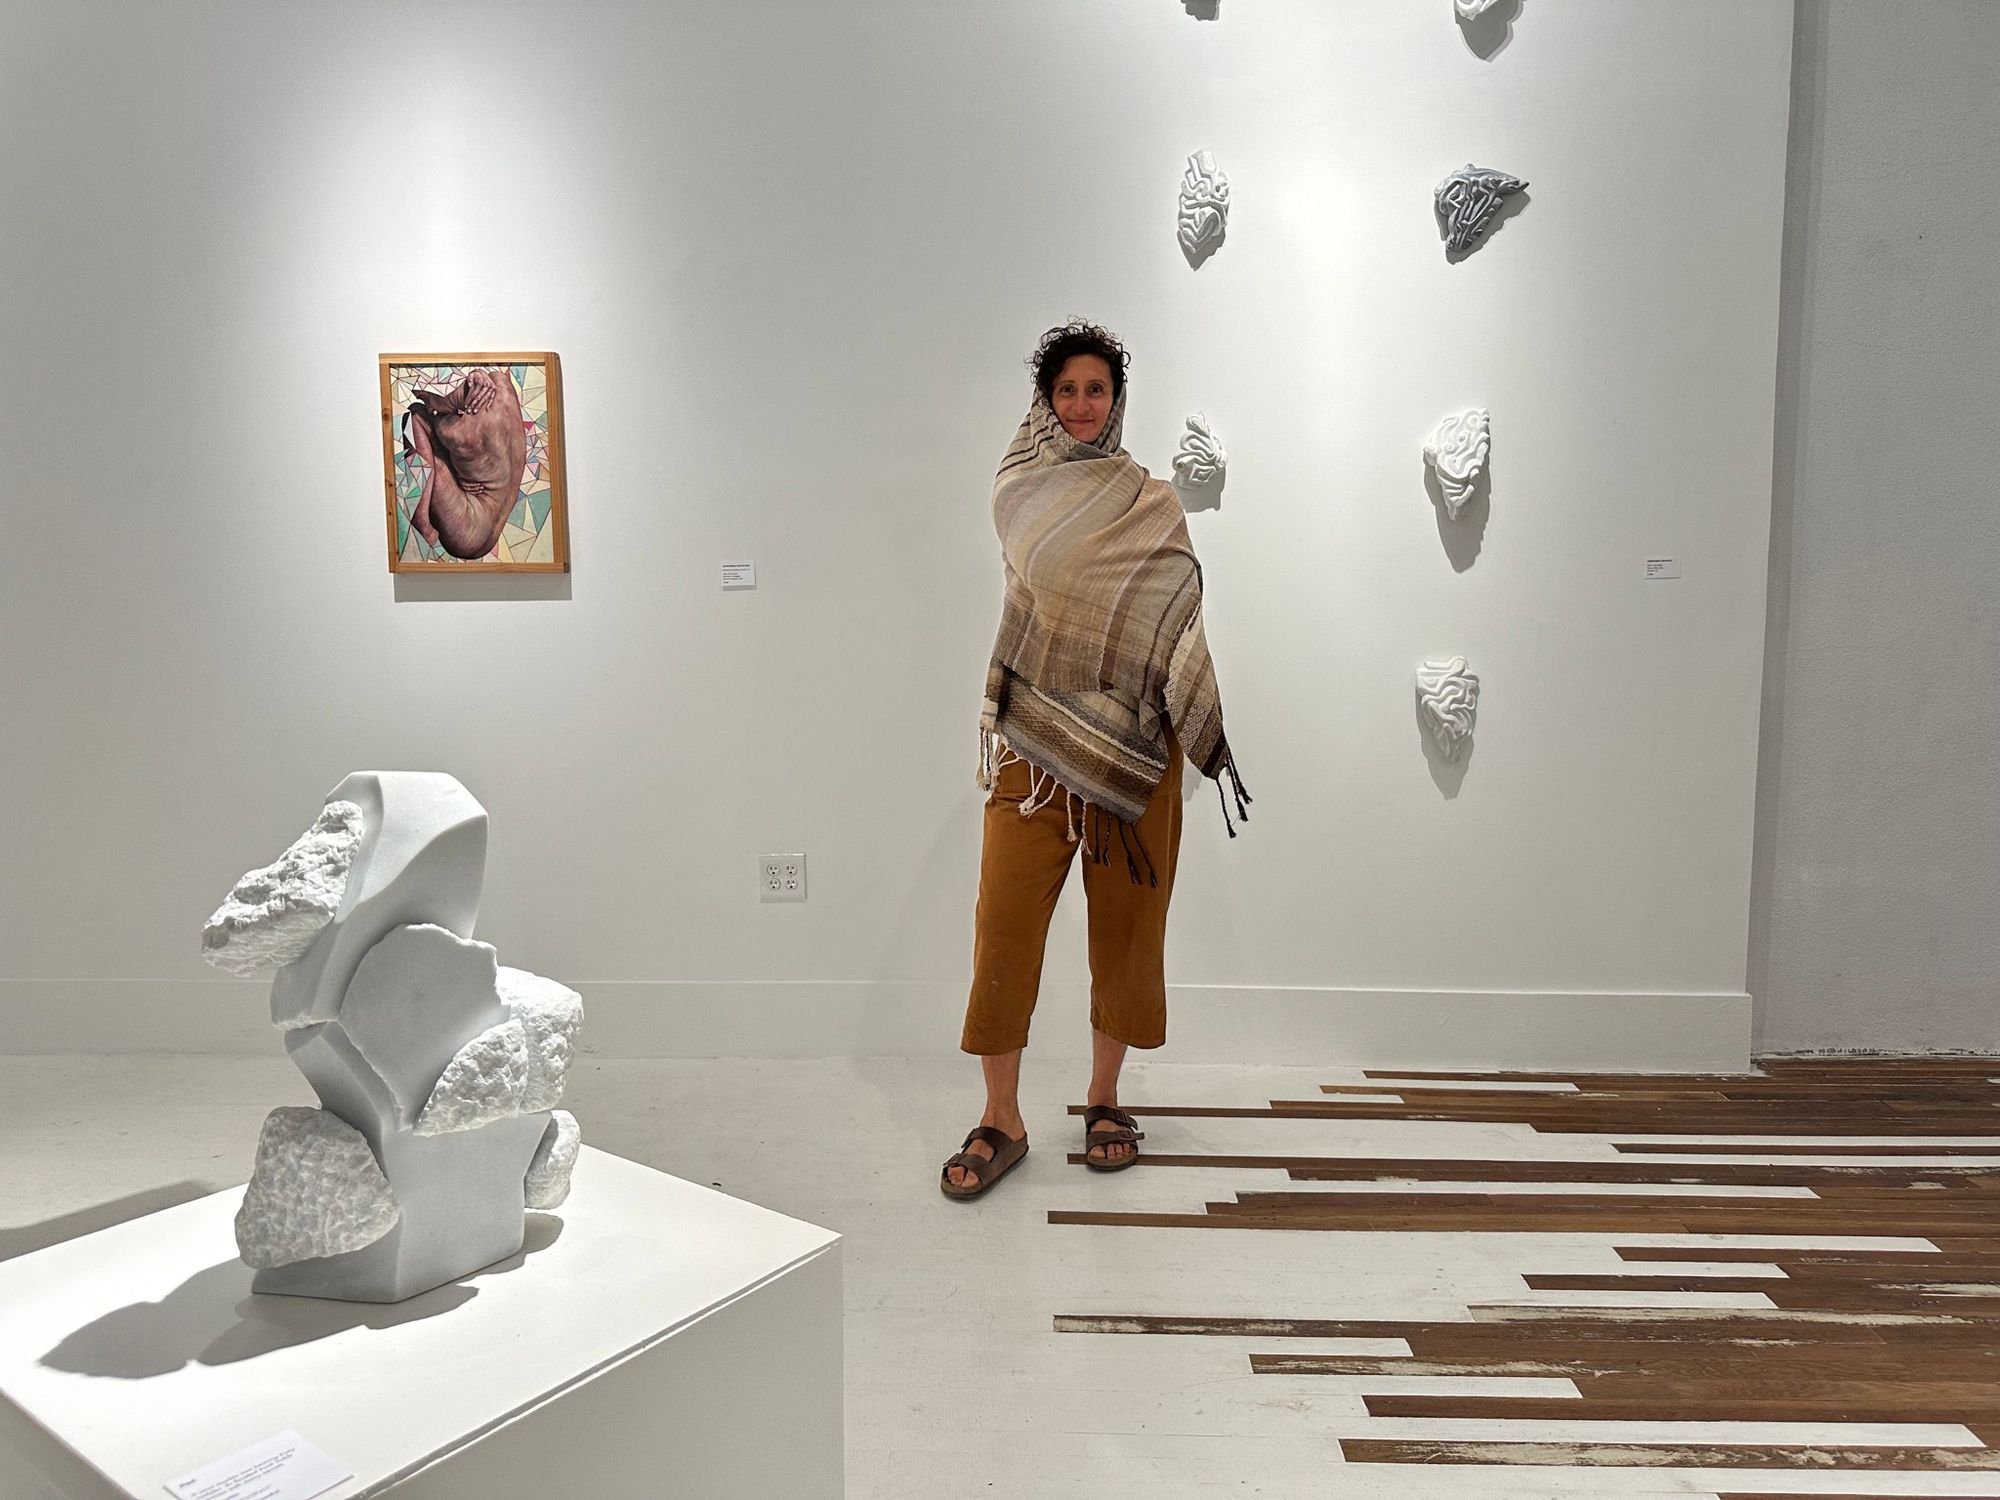 A woman wearing ochre colored overalls wears a brown, tan, white gradation shawl while moving around in a white and wooden gallery space with marble sculptures and oil paintings all around